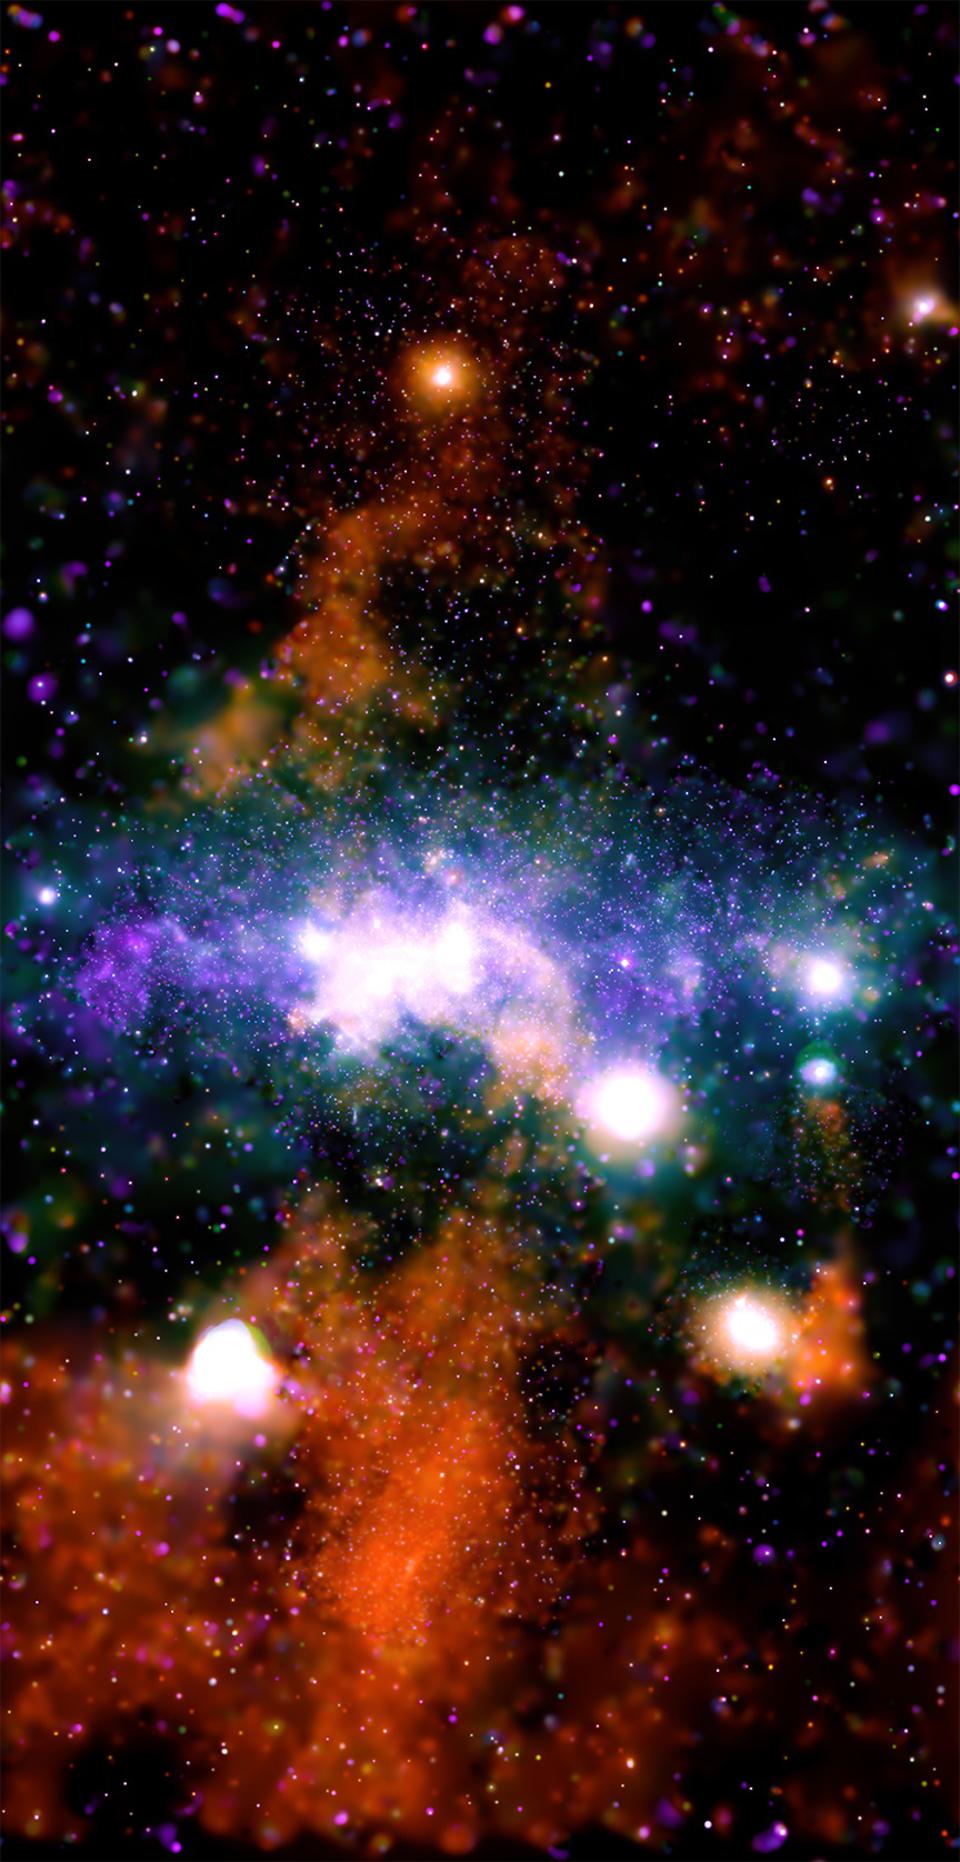 Composite image of the Galactic Center made with X-ray imagery from the Chandra X-ray Observatory. Courtesy of NASA/CXC/UMass/Q.D. Wang; Radio: NRF/SARAO/MeerKAT.